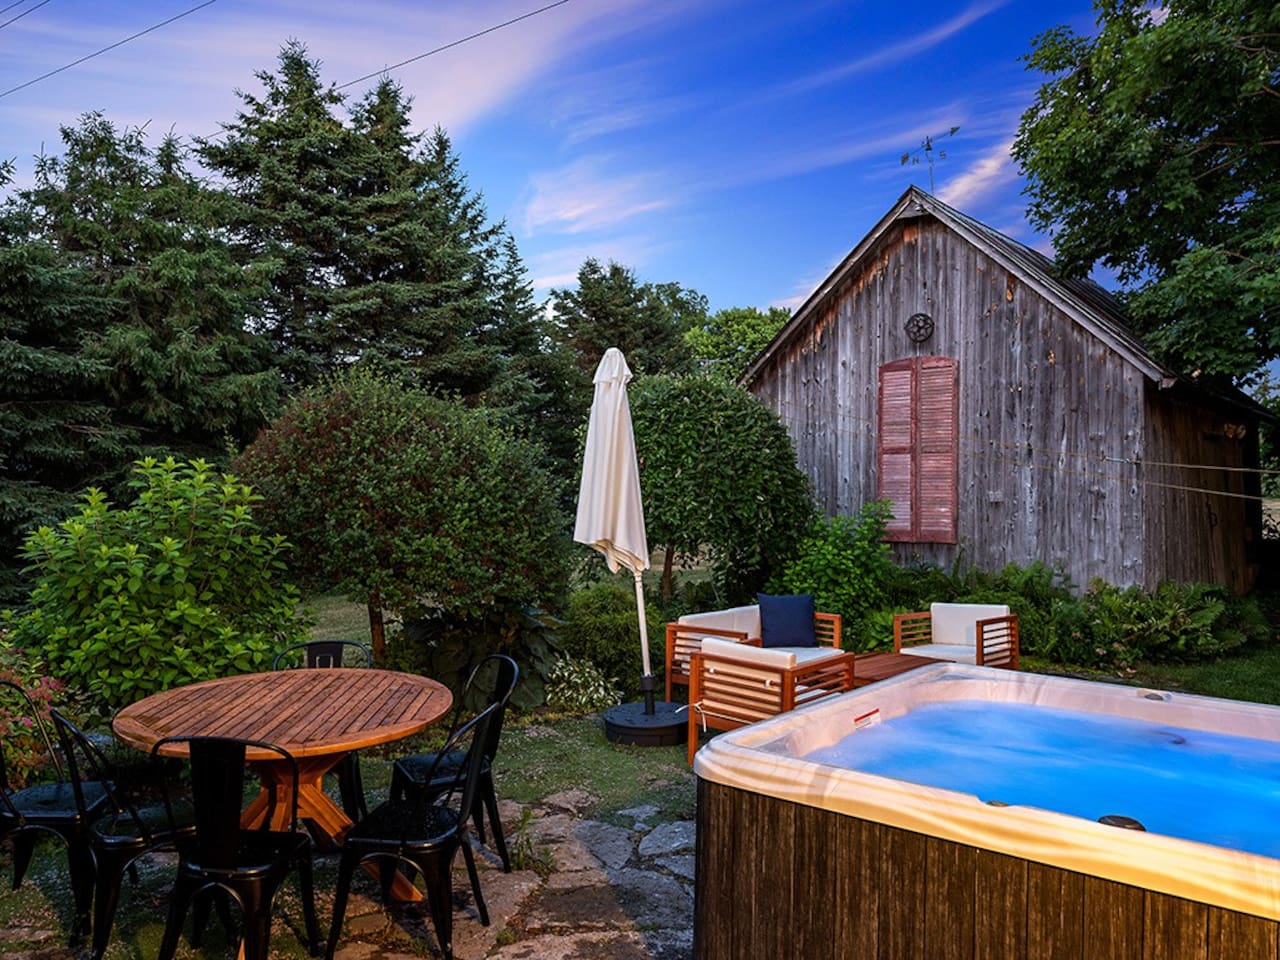 Property Image 1 - The Gem - Beautiful farmhouse with hot tub!